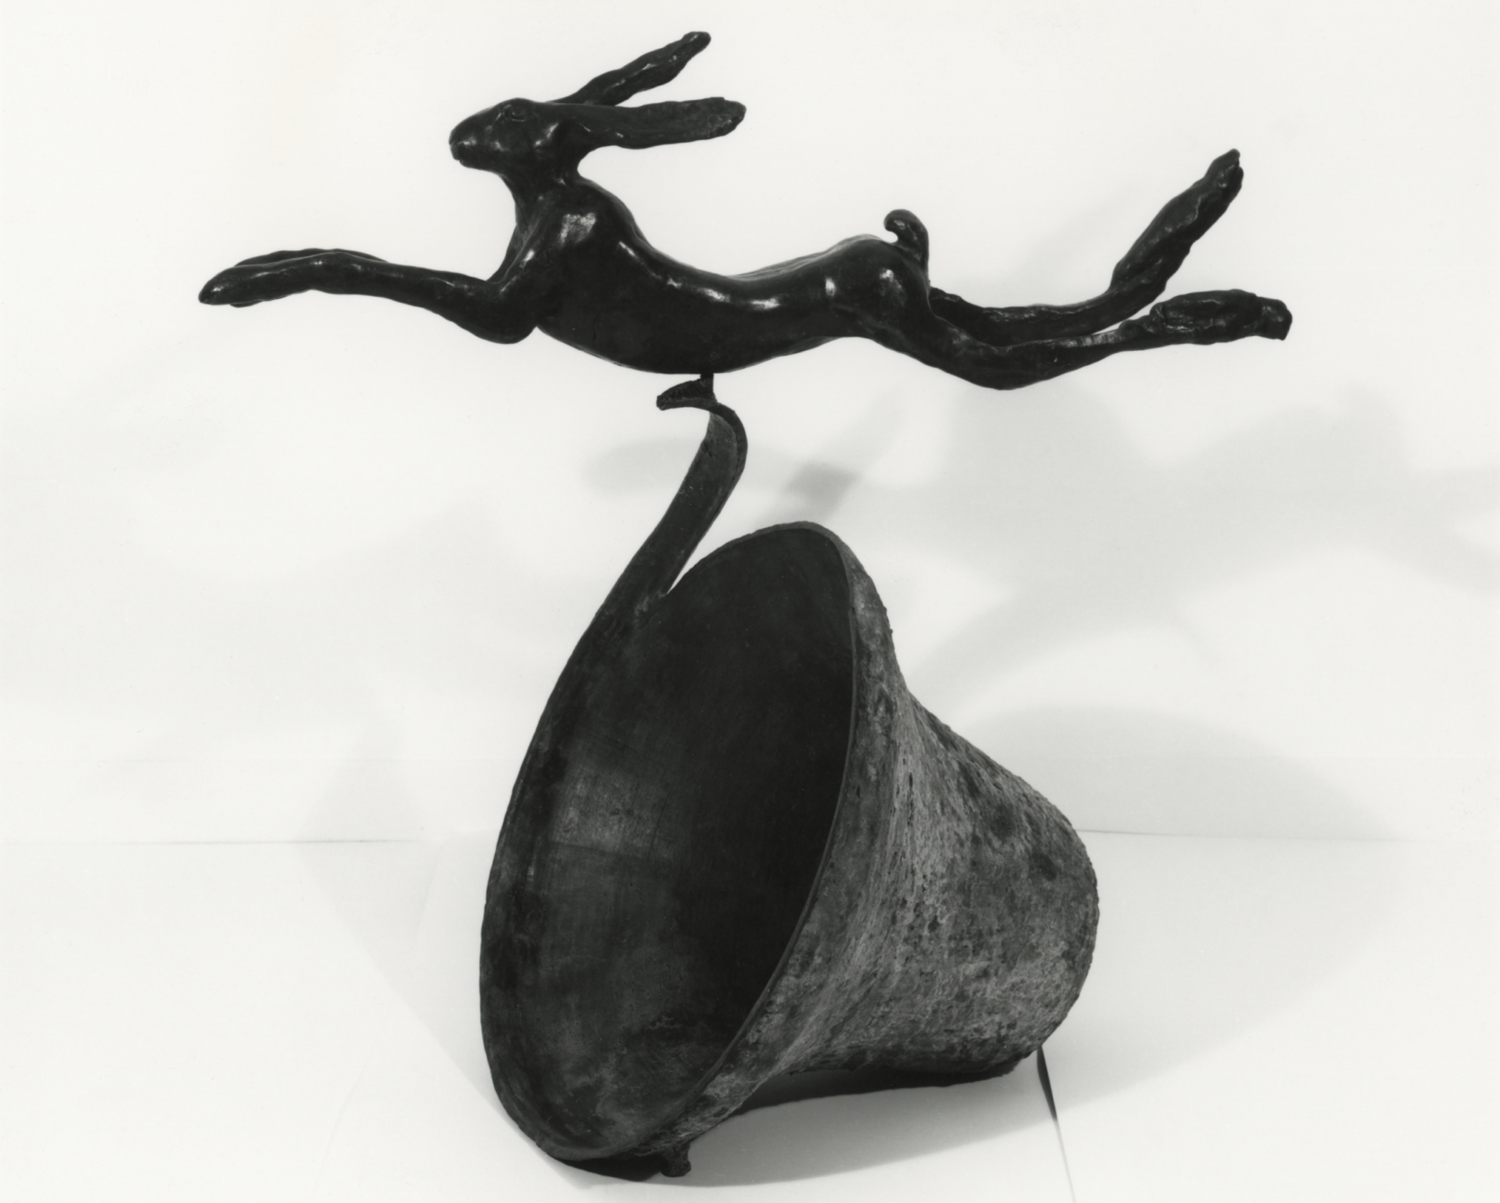 Untitled (Hare on bell apealing)